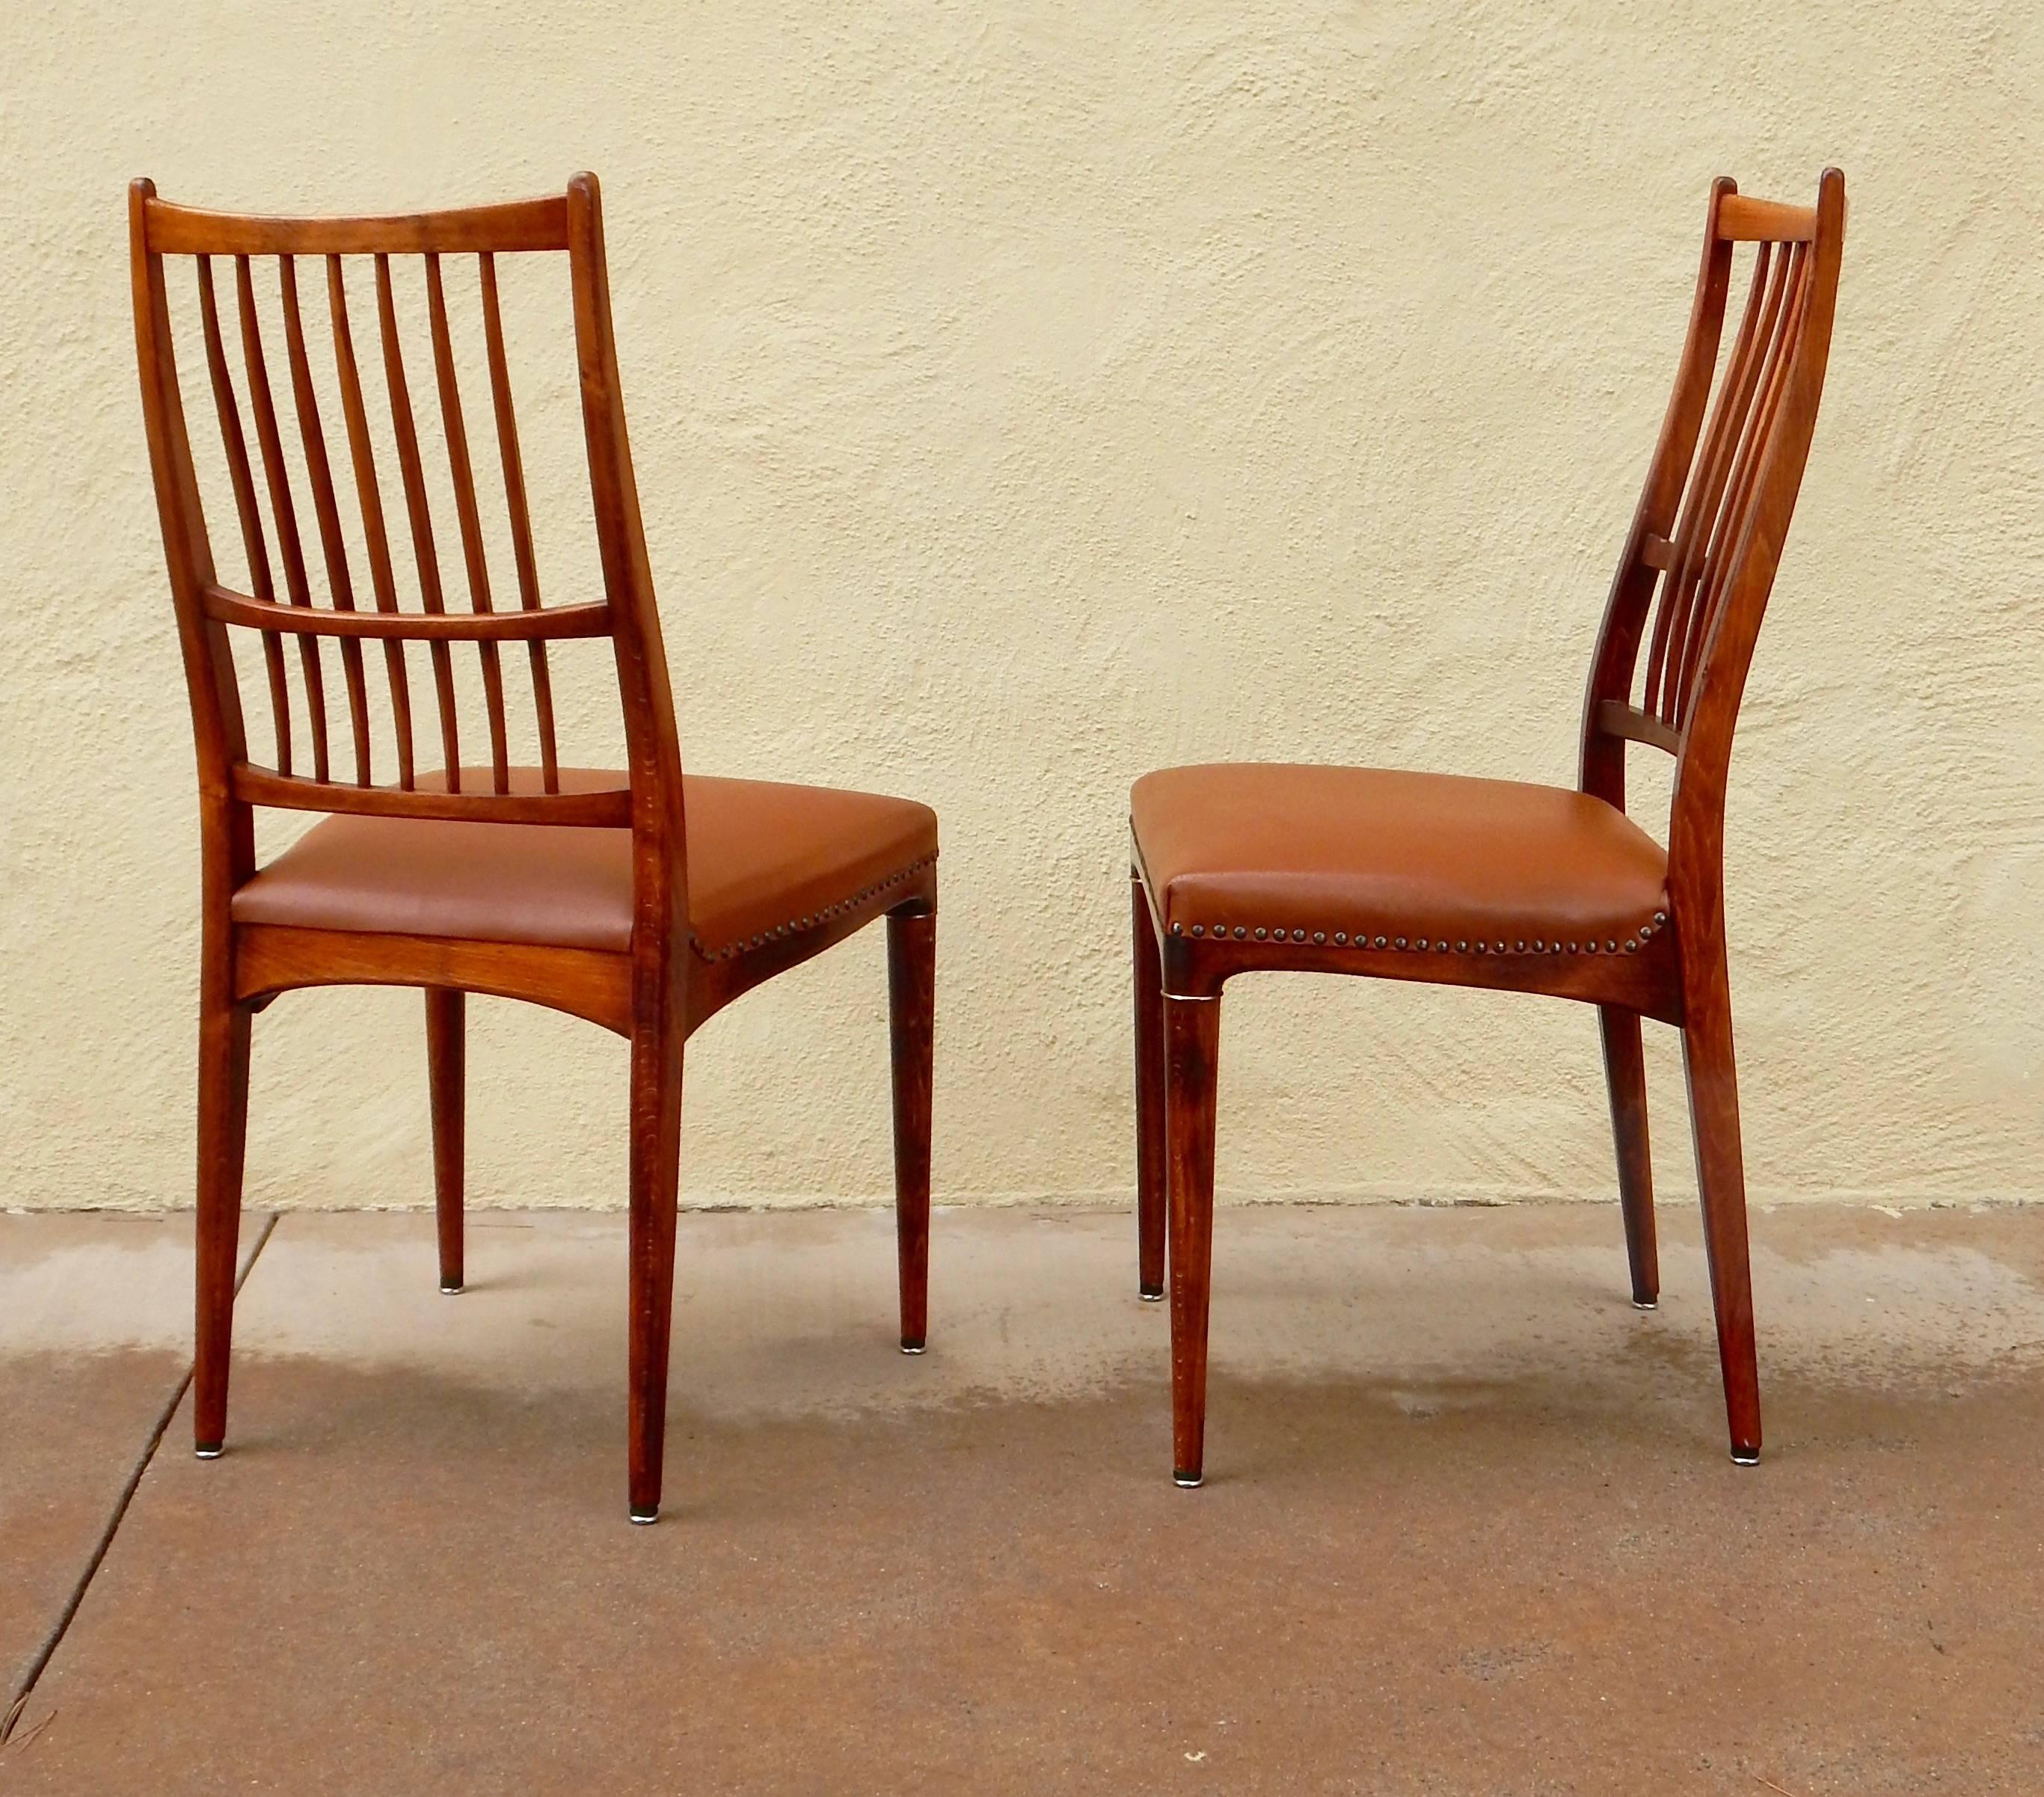 Set of four Mid-Century Modern dining chairs in stained birch wood. Sinuous, sculptural form. Leather seat with nailhead detail. Extremely pleasant to sit in and in excellent original condition. I have an additional four of these if needed for a set